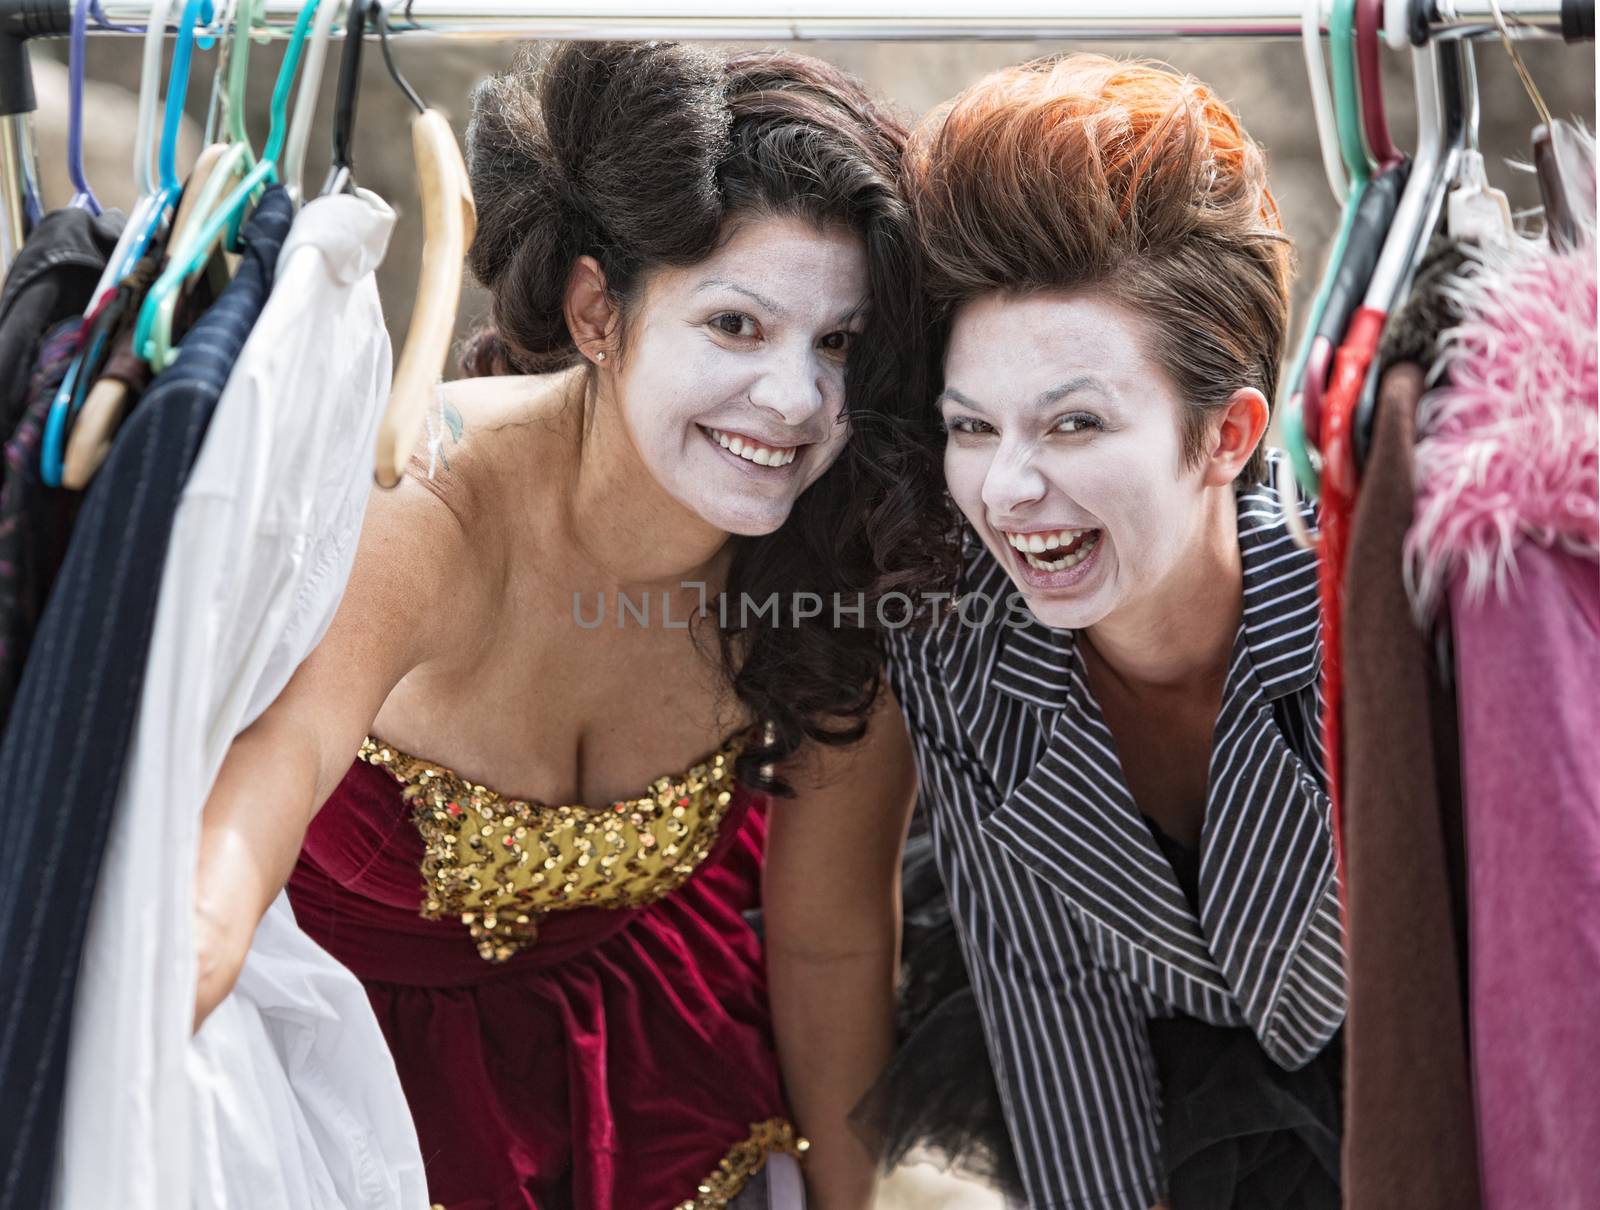 Laughing Clowns at Clothes Rack by Creatista